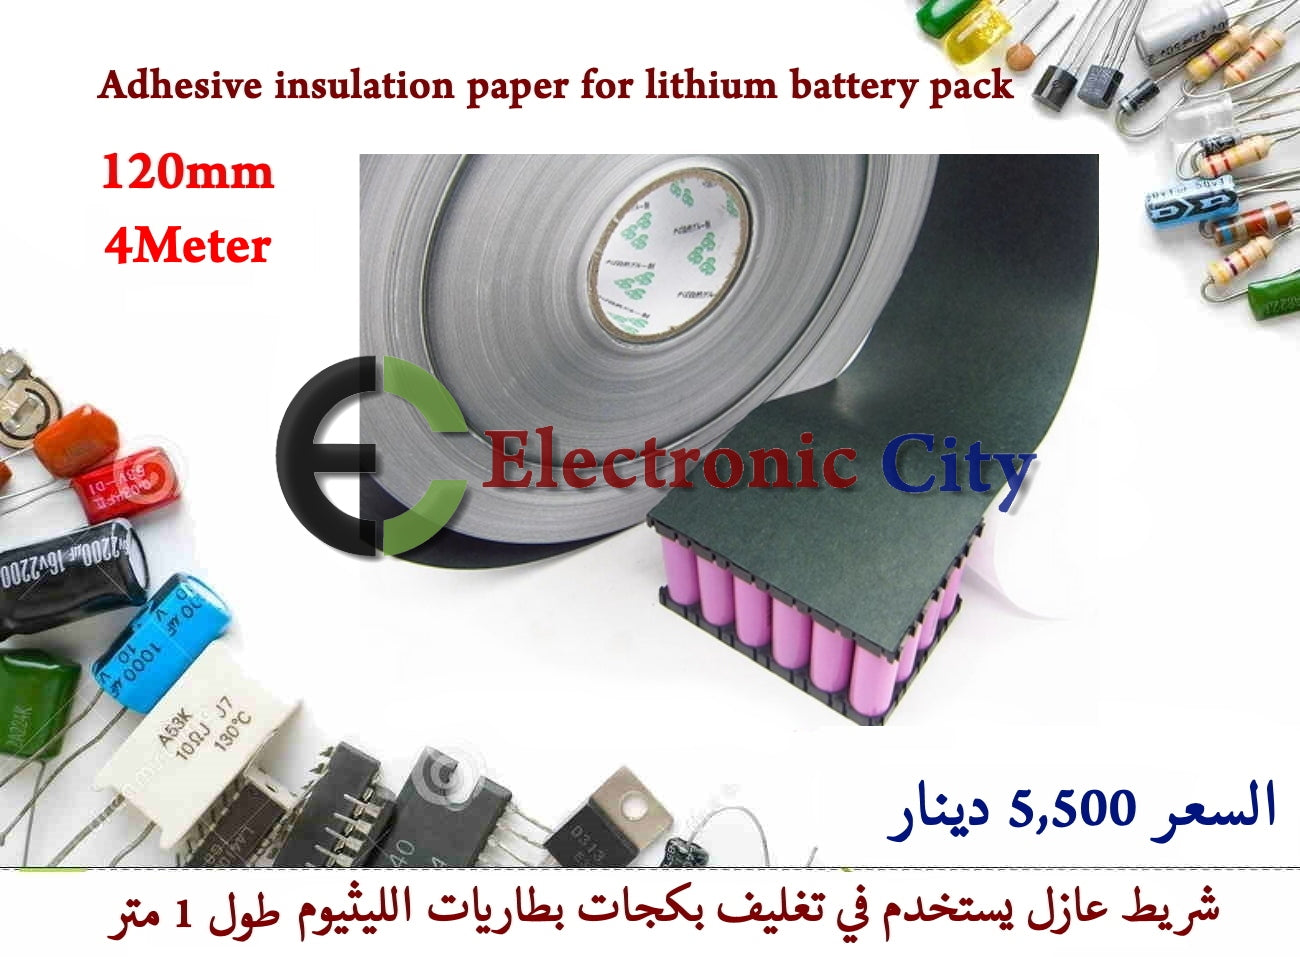 Adhesive insulation paper for lithium battery pack 120mm 4M